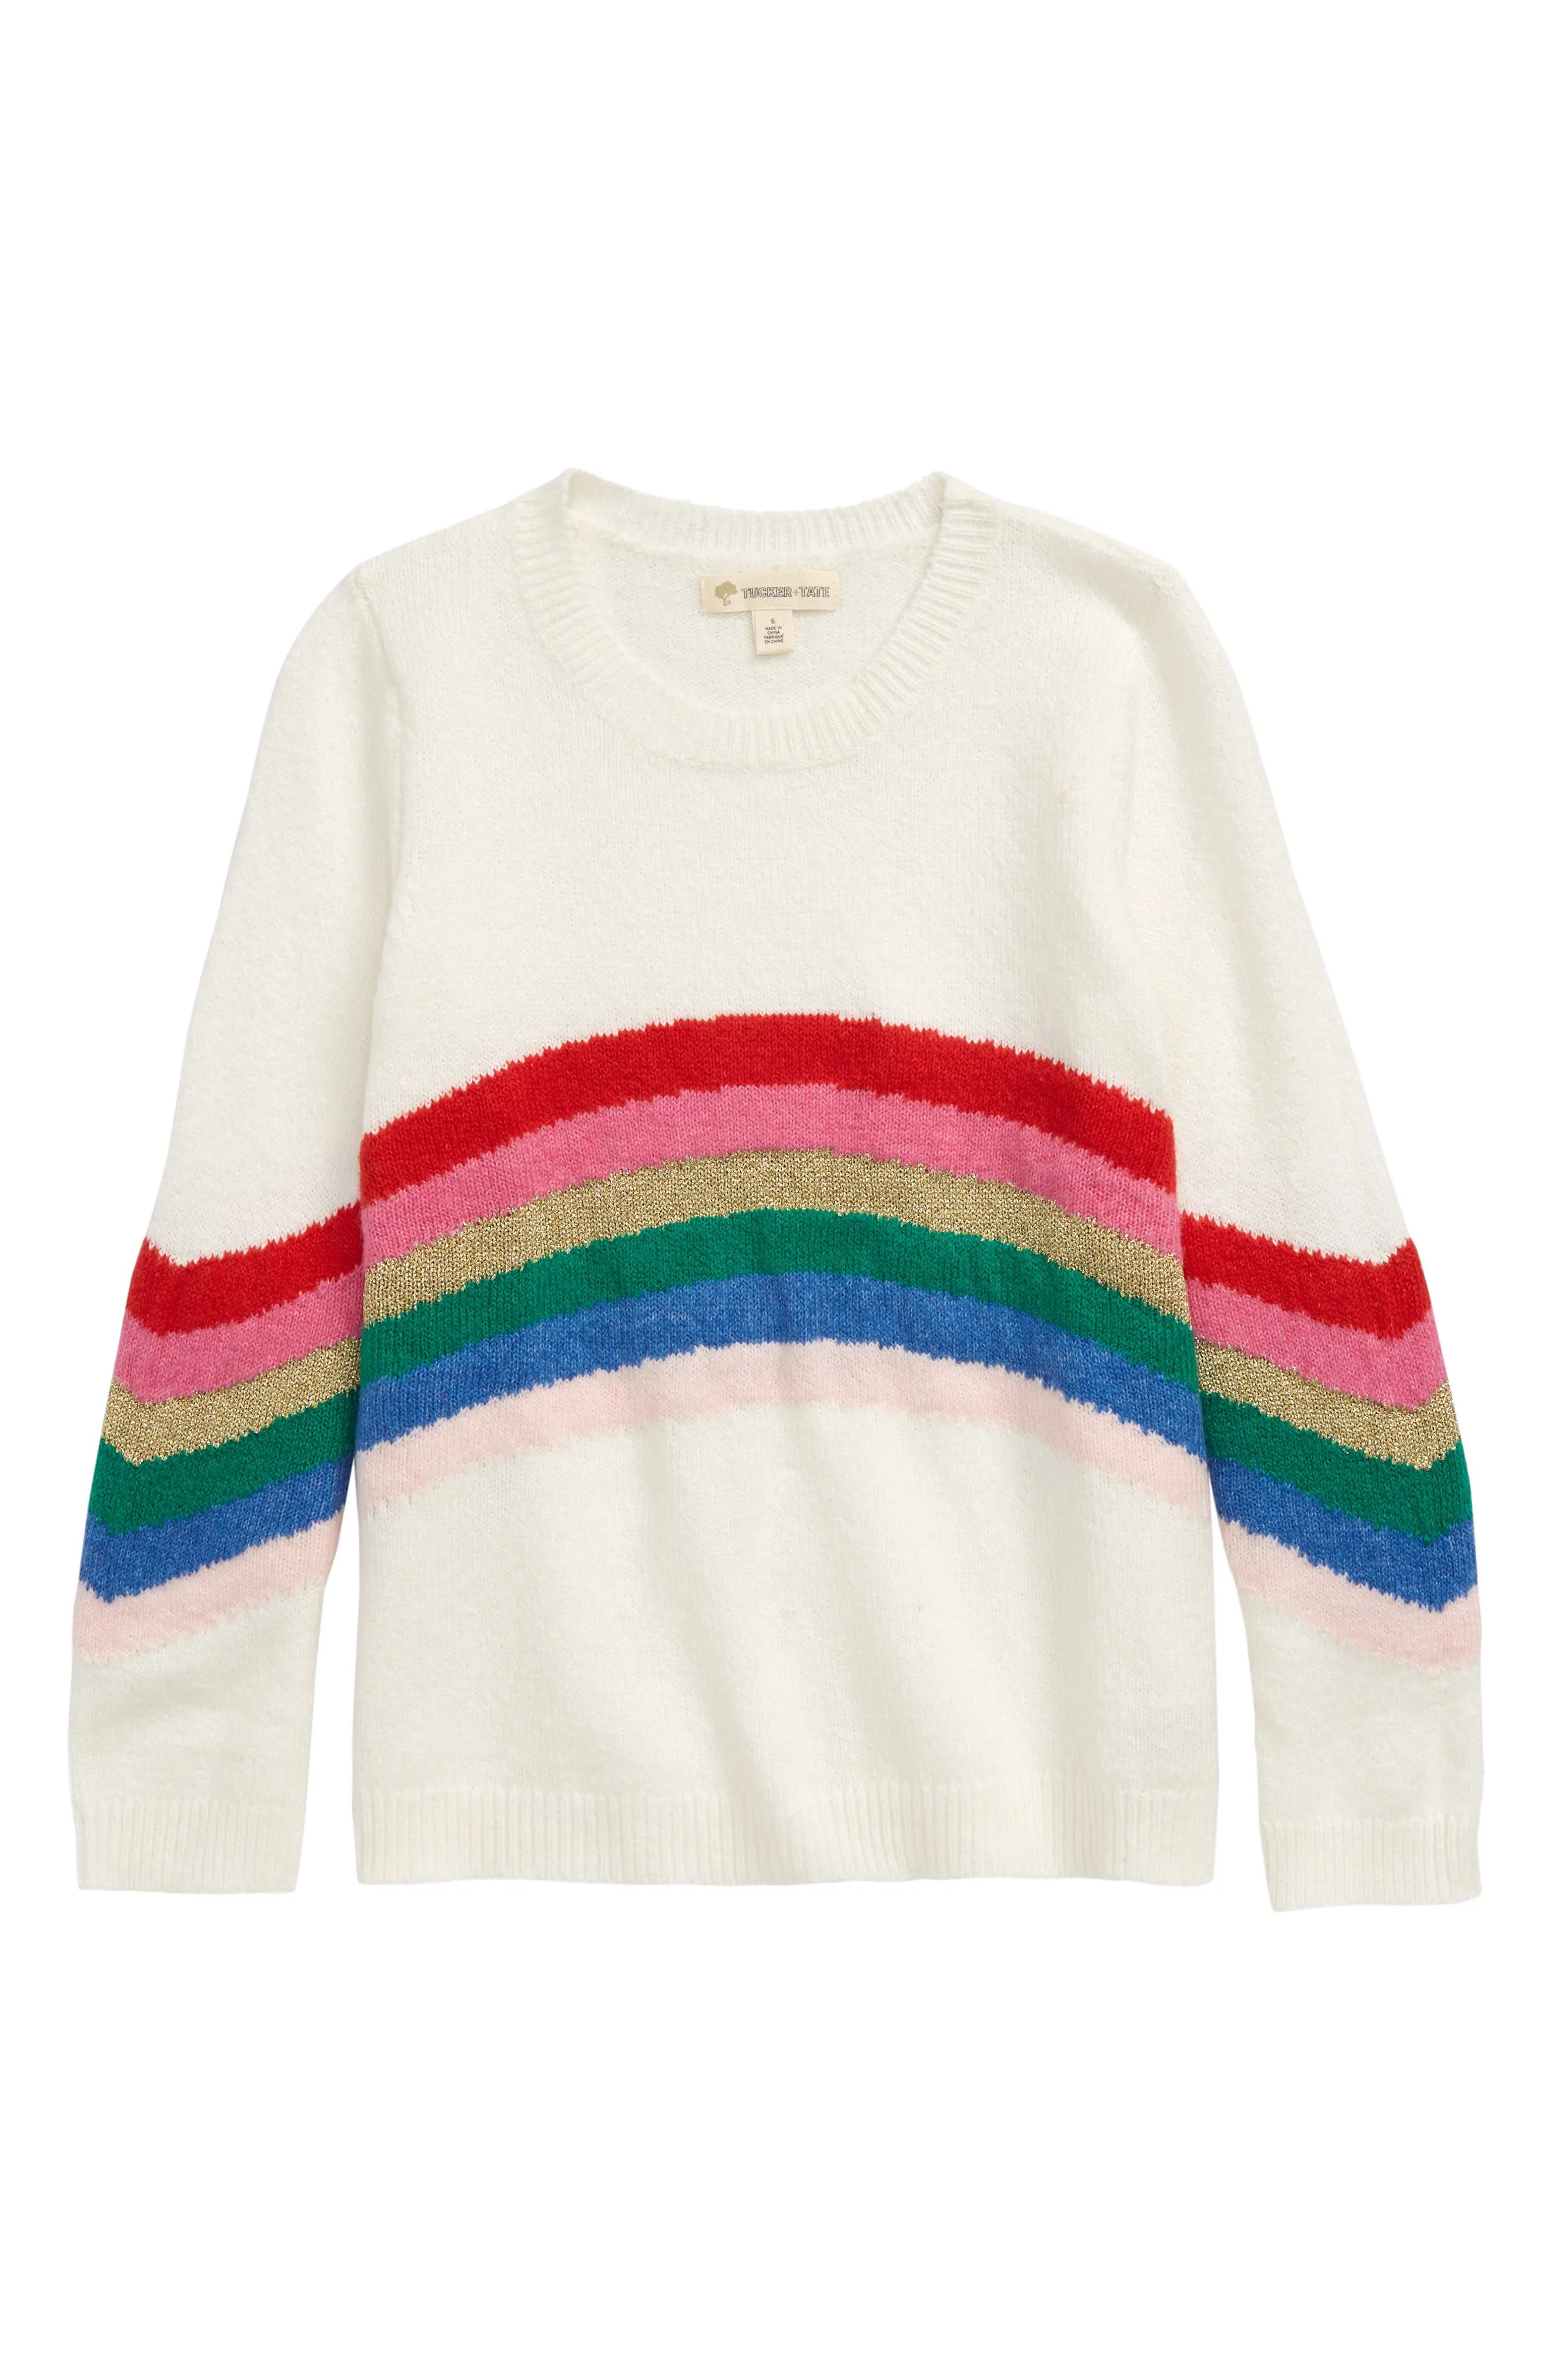 Tucker + Tate Rainbow Stripe Sweater, Size 2 in Ivory Egret Rainbow at Nordstrom | Nordstrom